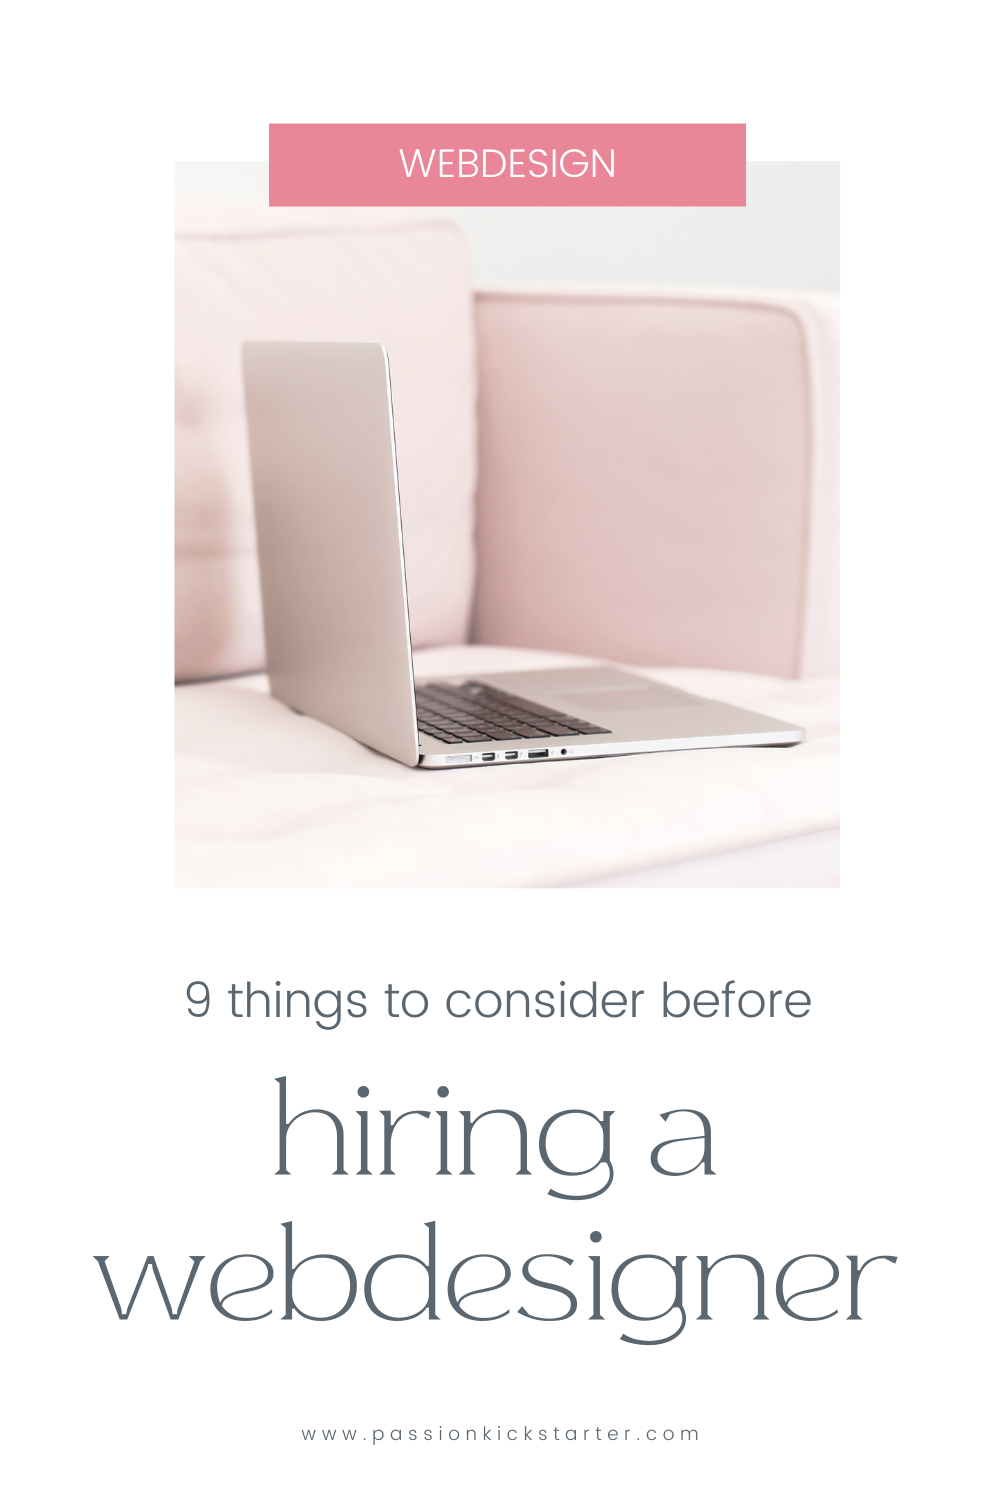 9 things to consider before you hire a webdesigner